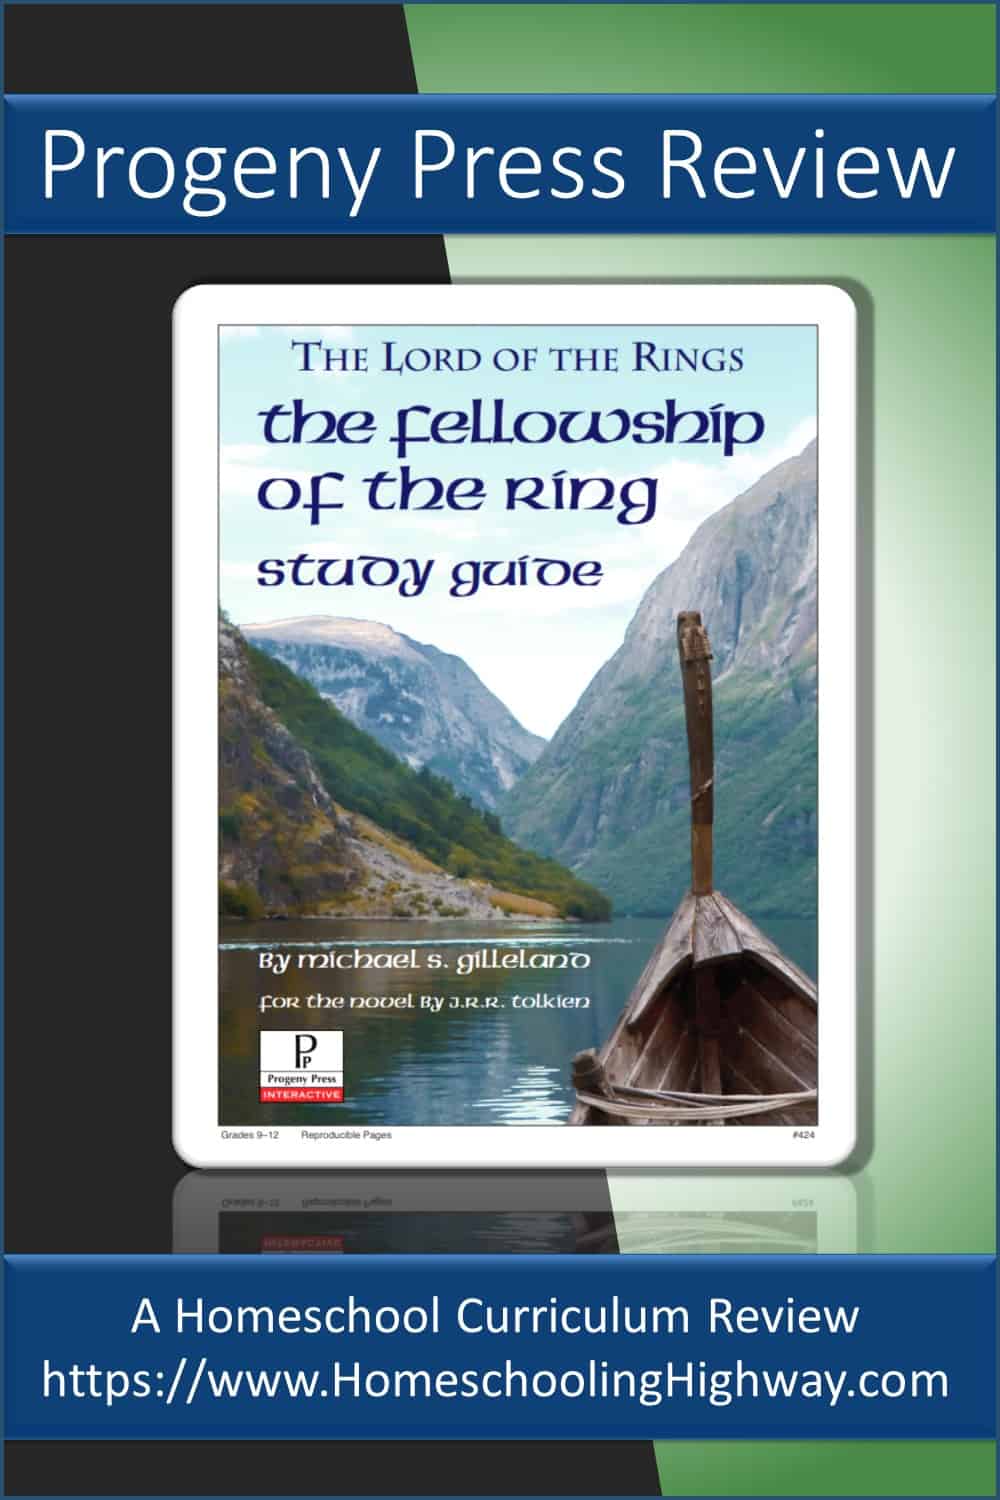 The Fellowship of the Ring Study Guide from Progeny Press. Reviewed by Homeschooling Highway